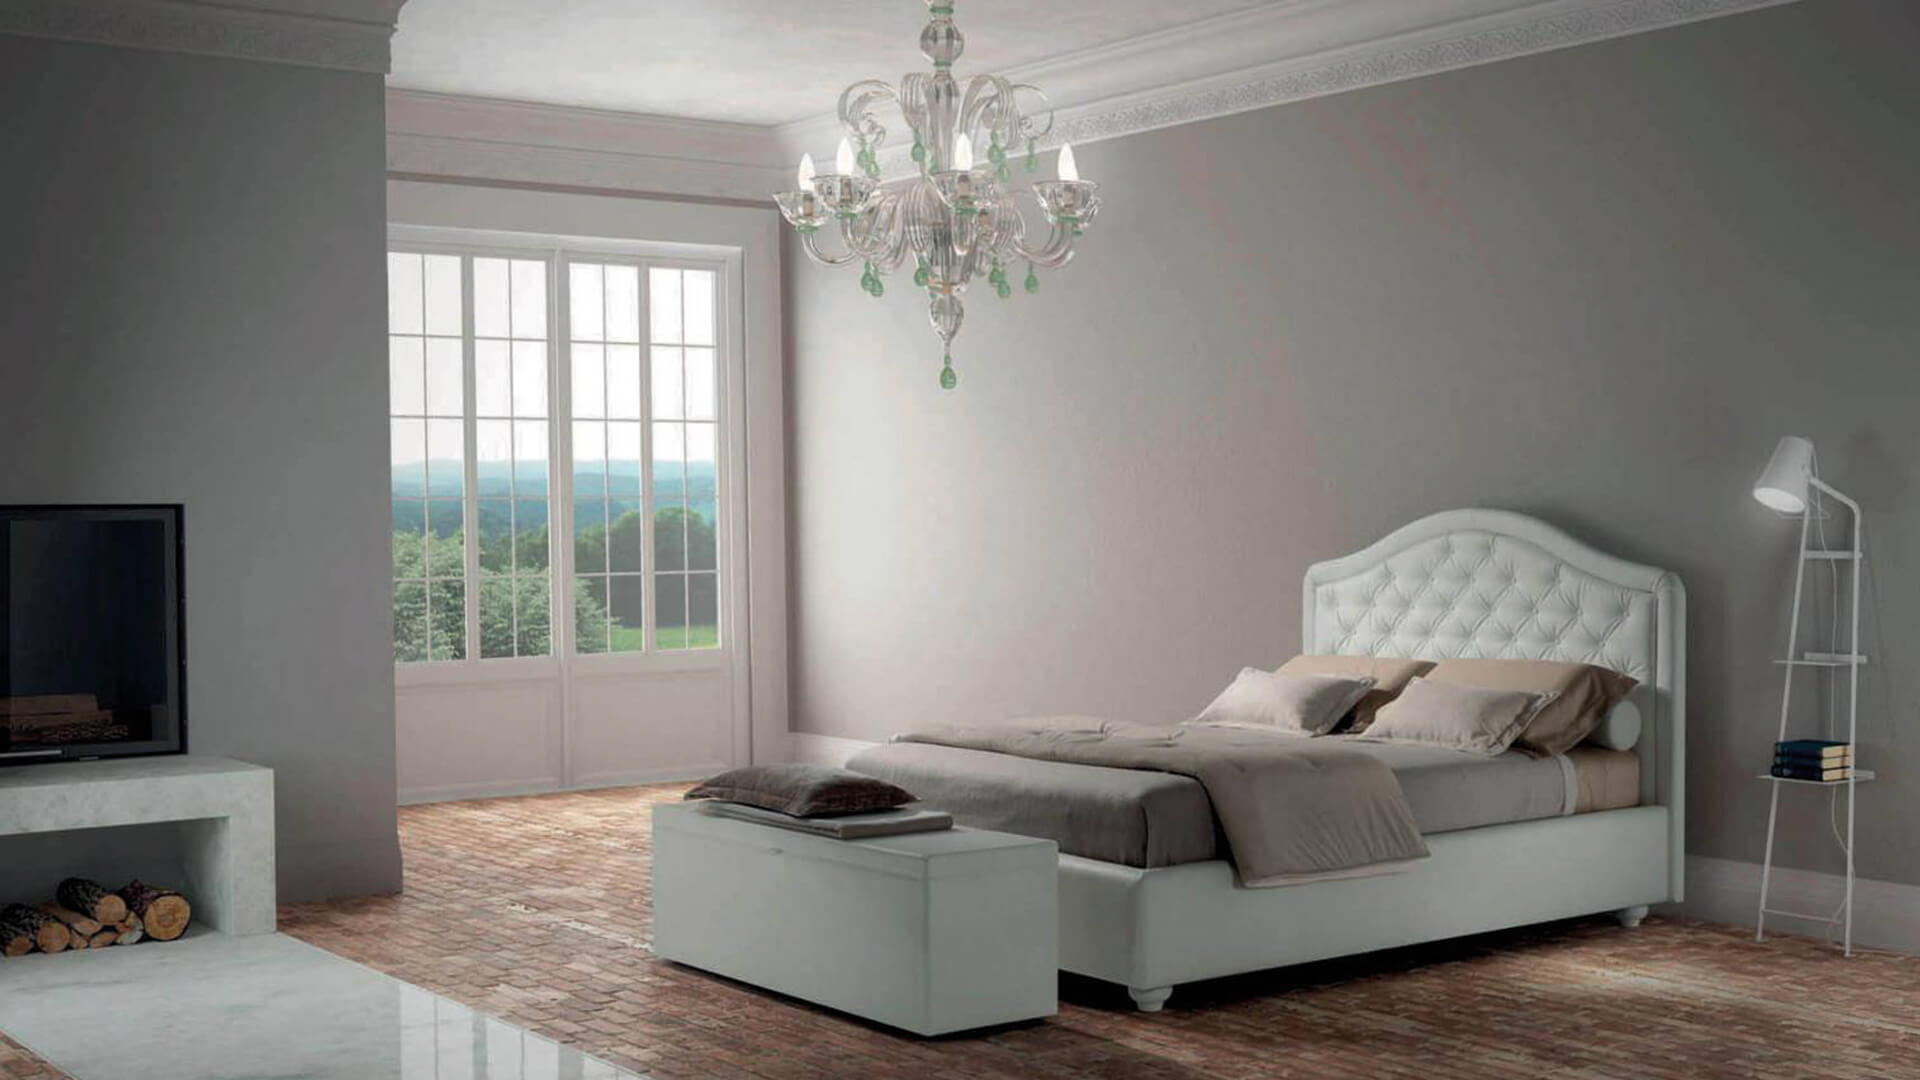 Blog IDW - Ideas and suggestions for furnishing your bedroom